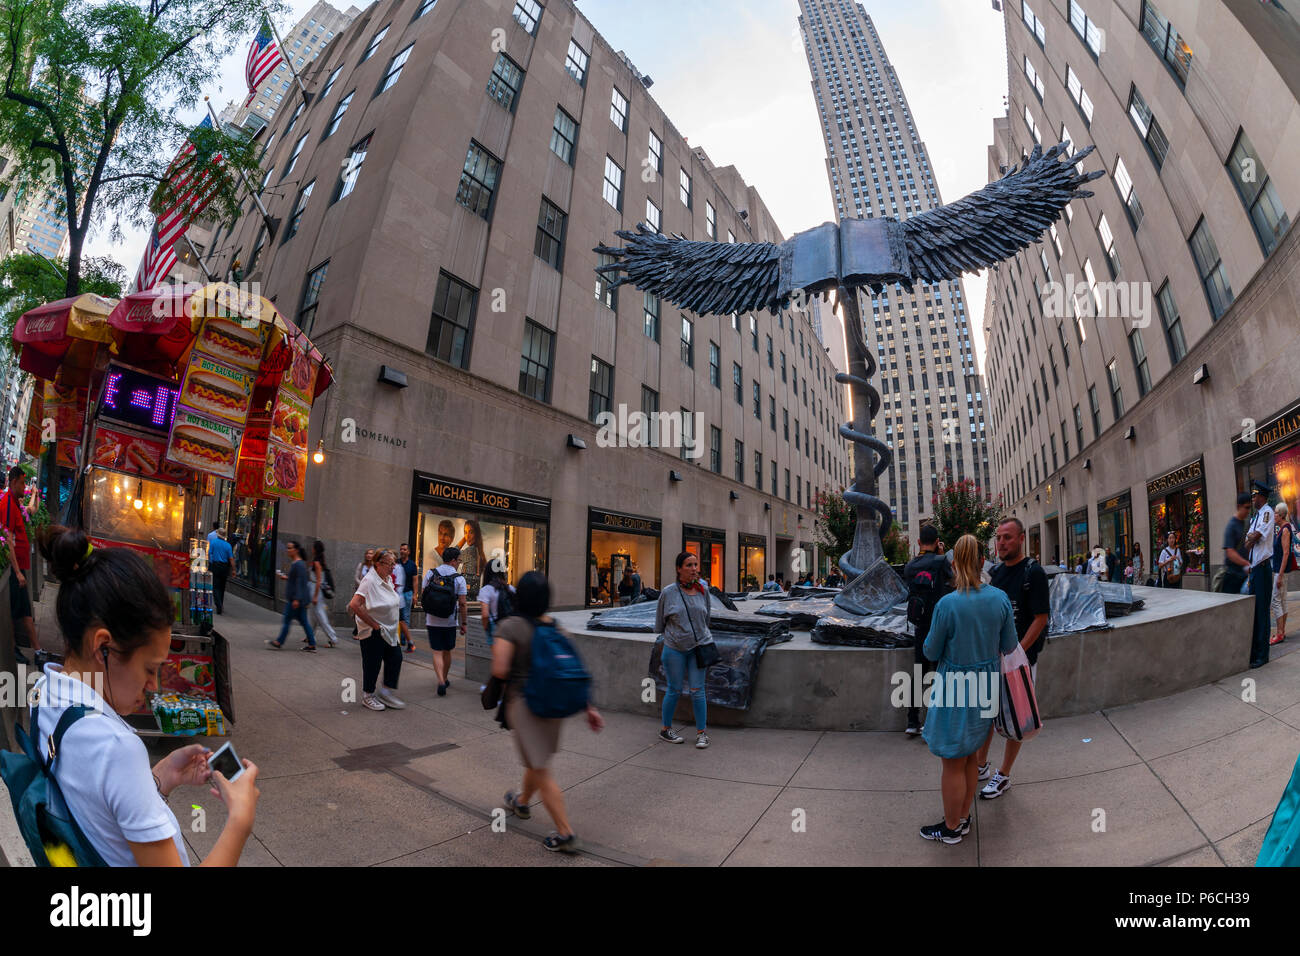 'Uraeus' by the artist Anselm Kiefer on display at Rockefeller Center in New York on Tuesday, June 26, 2018. The artwork, named for the cobra that symbolizes the Egyptian goddess Wadjet is 20 feet tall, with a wingspan of  30 feet, made of lead and will be on display until July 22. (Â© Richard B. Levine) Stock Photo